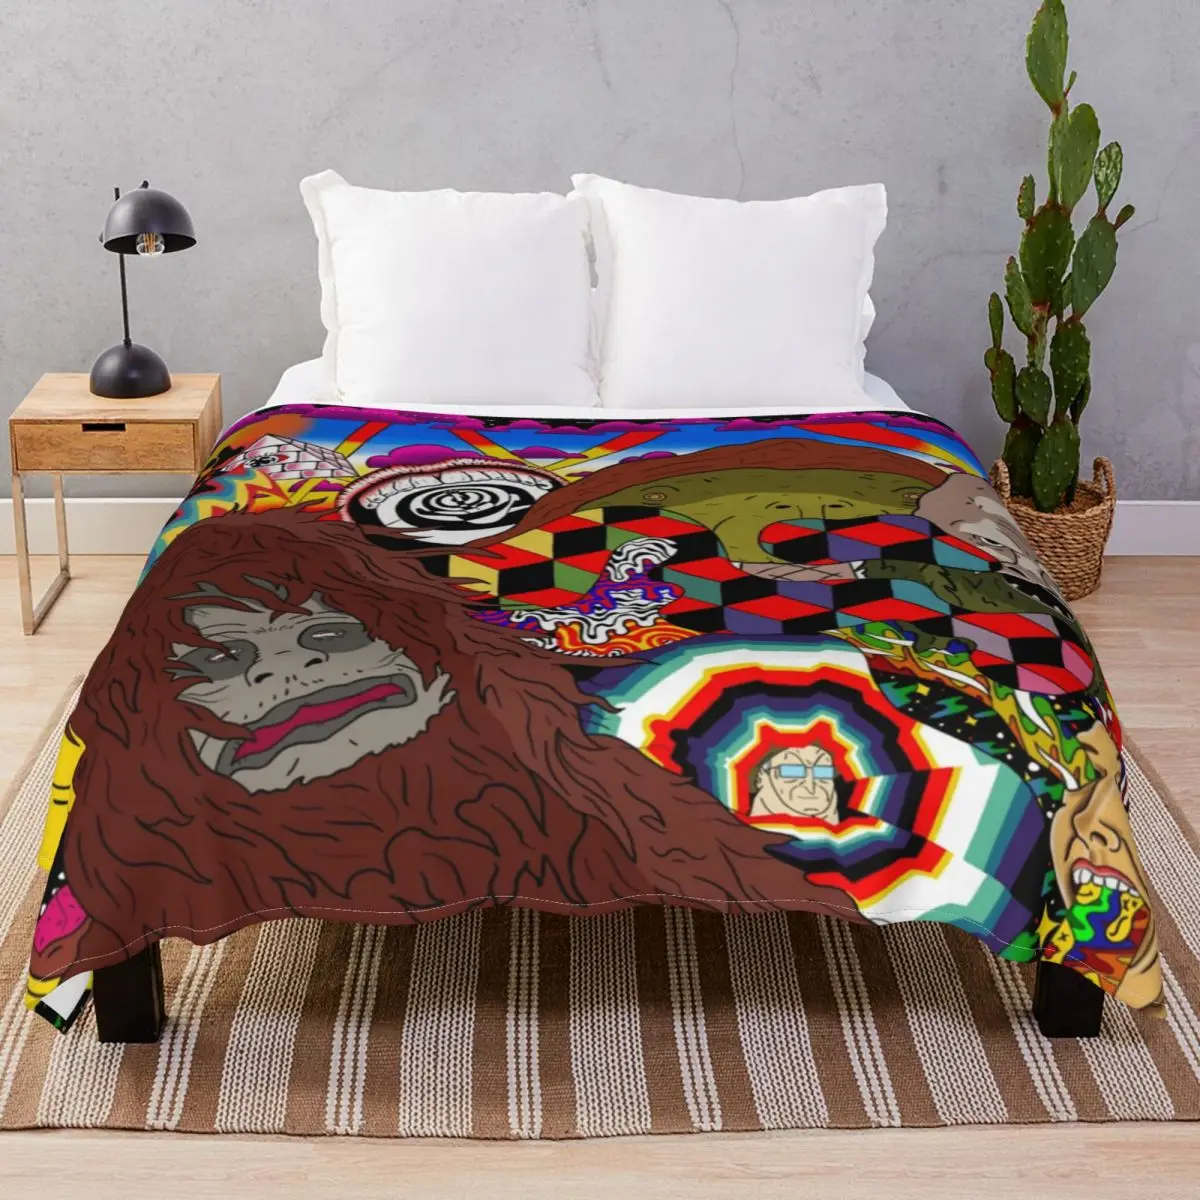 The Big Lez Show Wall Art Blankets Flannel Printed Comfortable Throw Blanket for Bed Sofa Travel Office